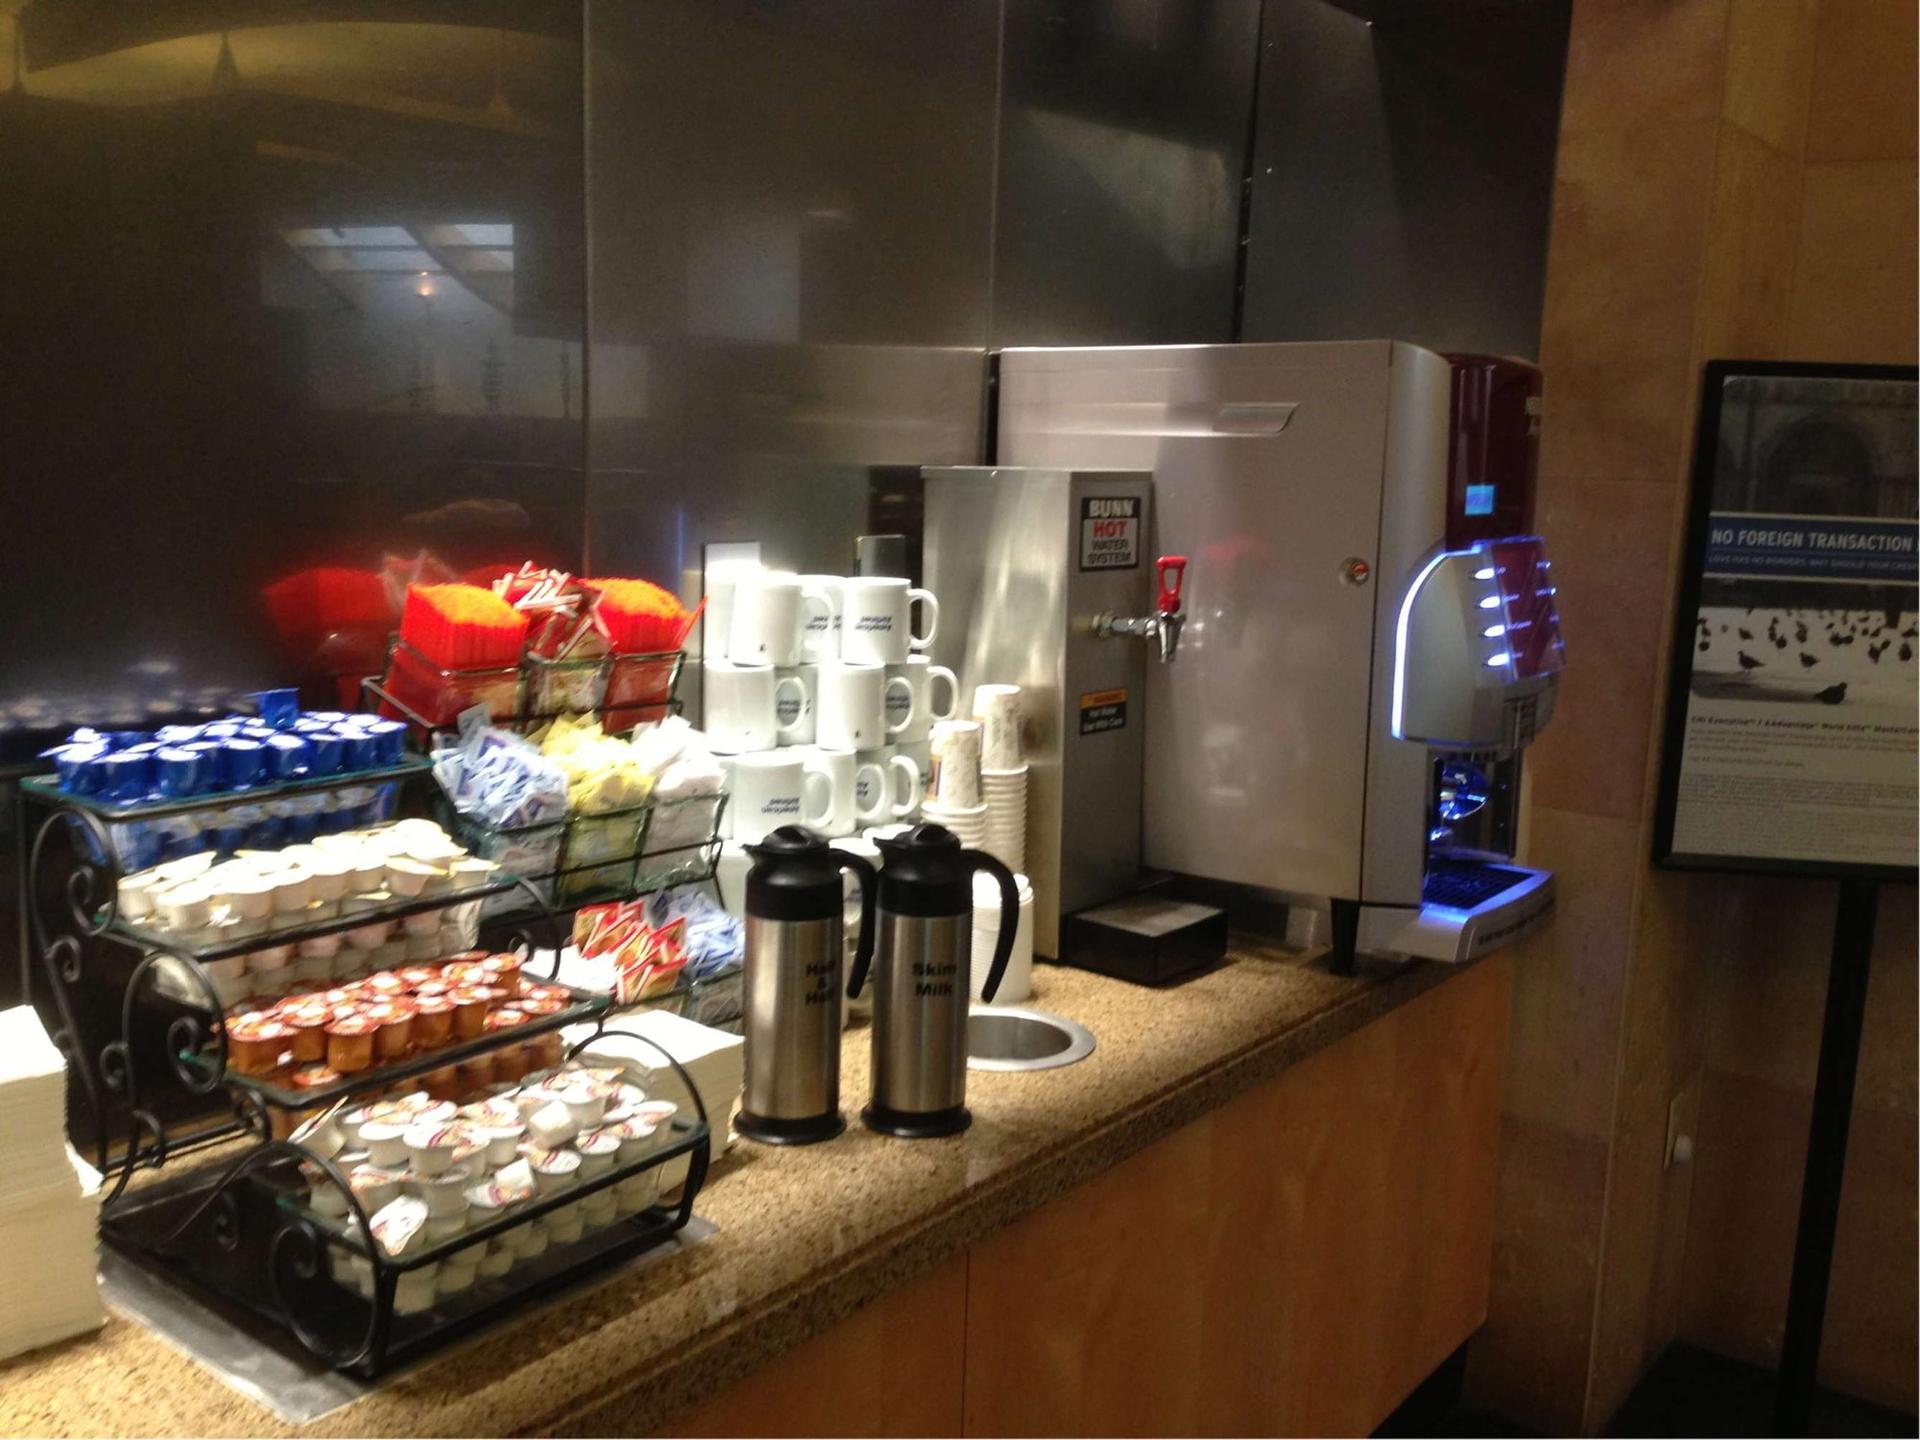 American Airlines Admirals Club image 1 of 17